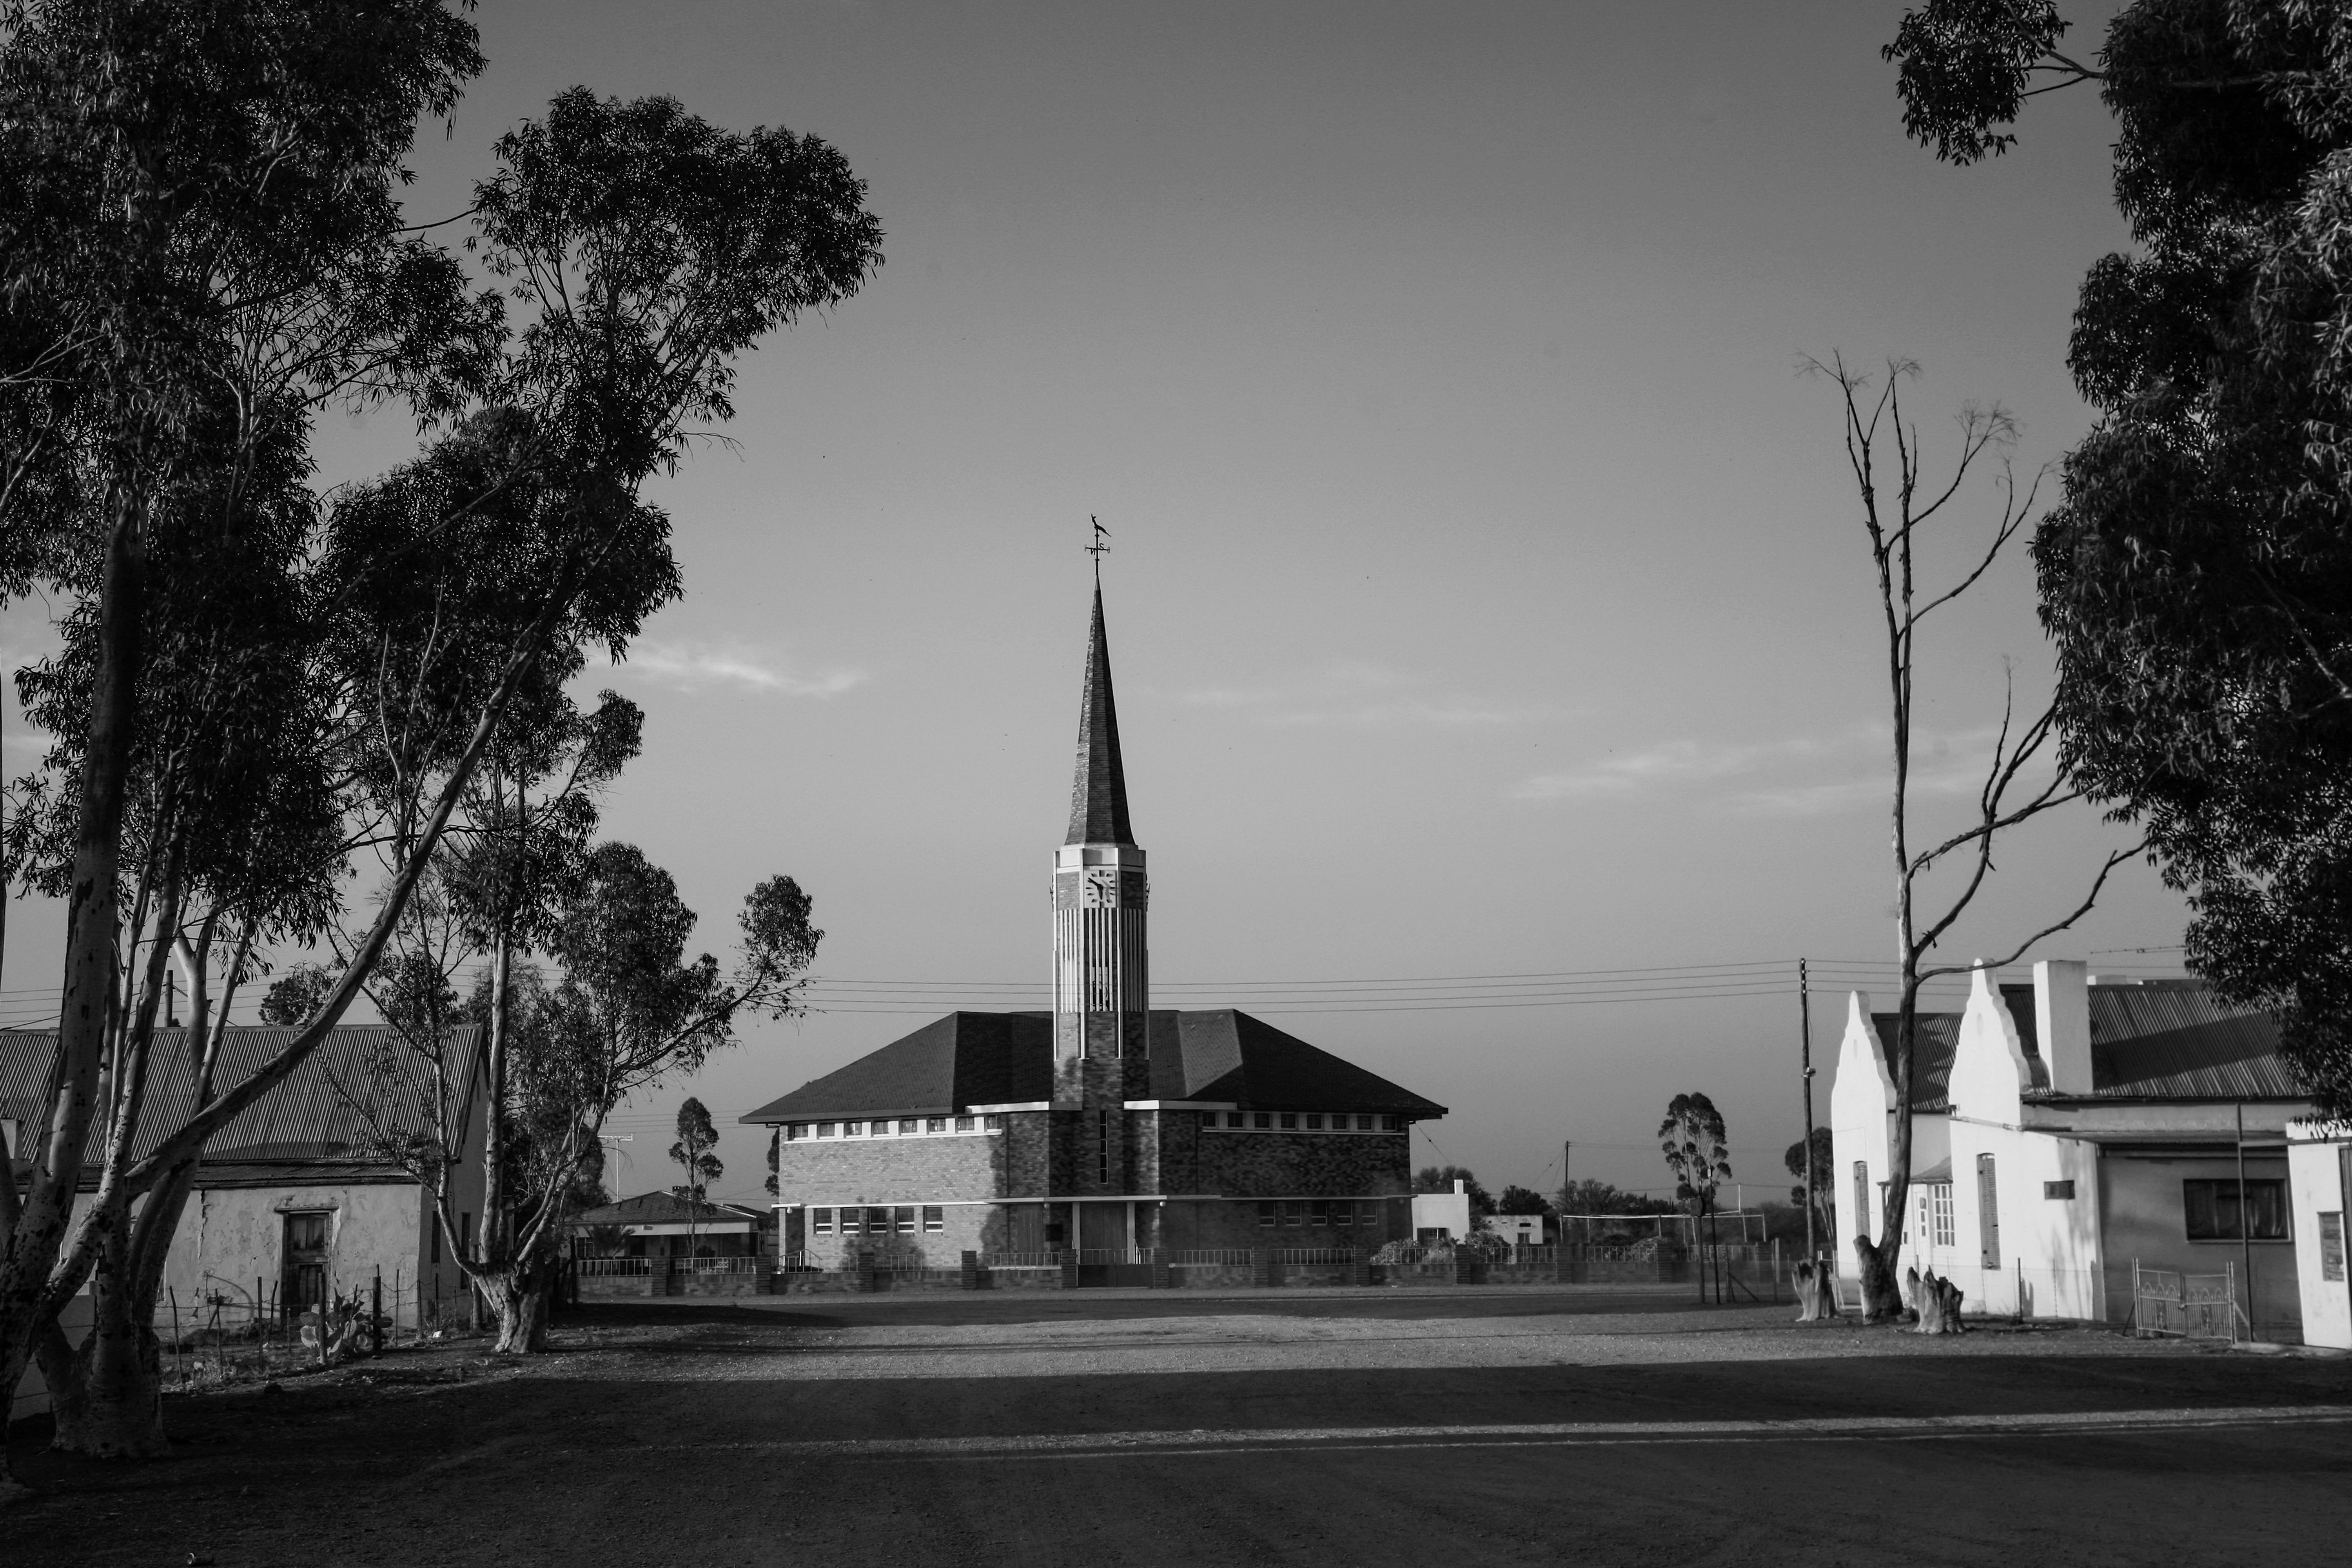 The Rietbron Mother Church, with its springbokkie steeple.